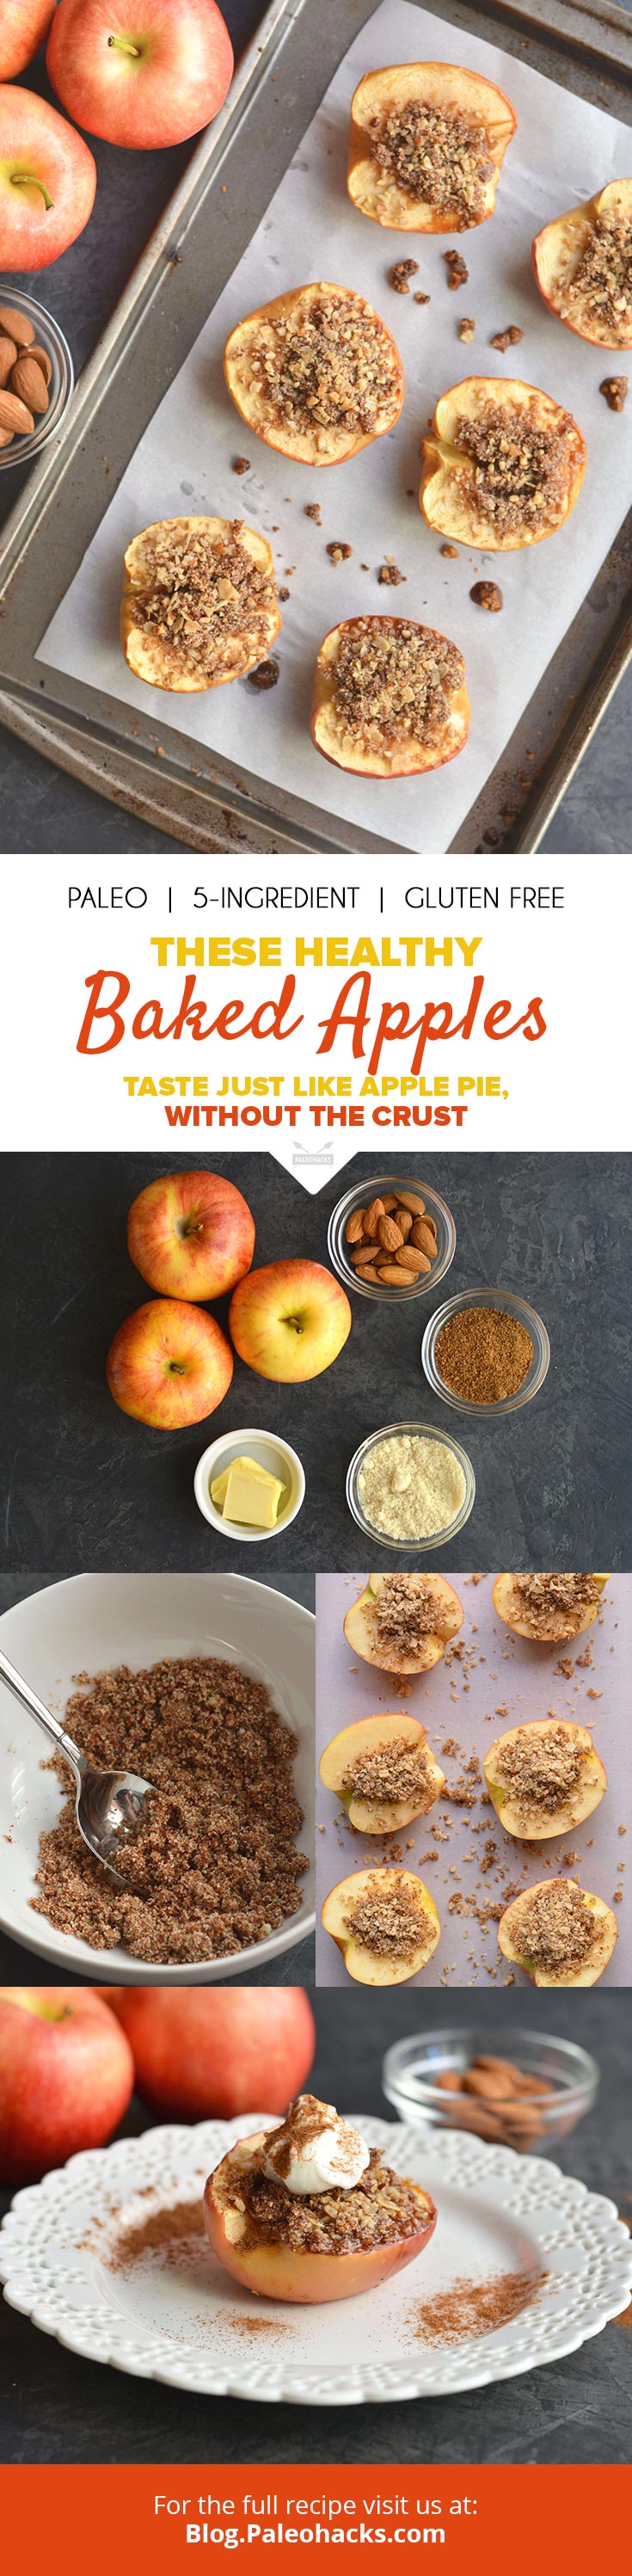 This simple recipe takes everything you love about apple pie and stuffs it into tender, baked apples.